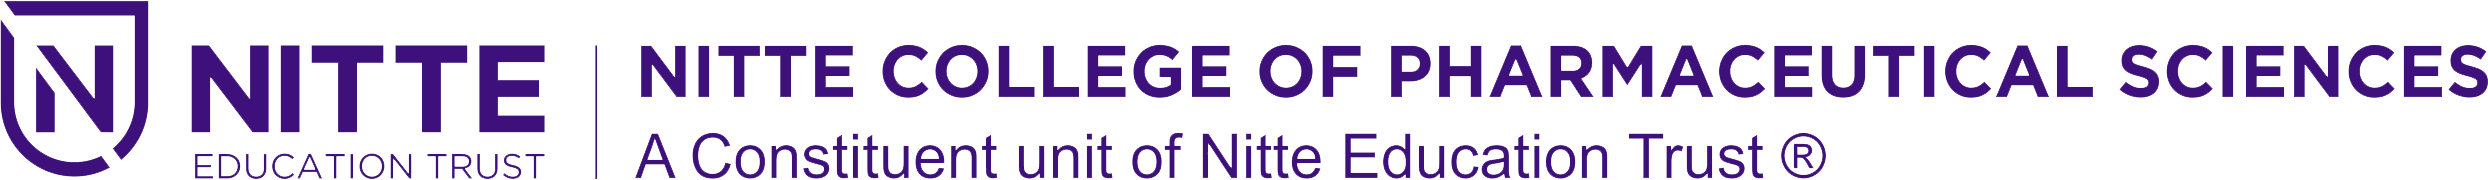 Nitte College of Pharmaceutical Sciences